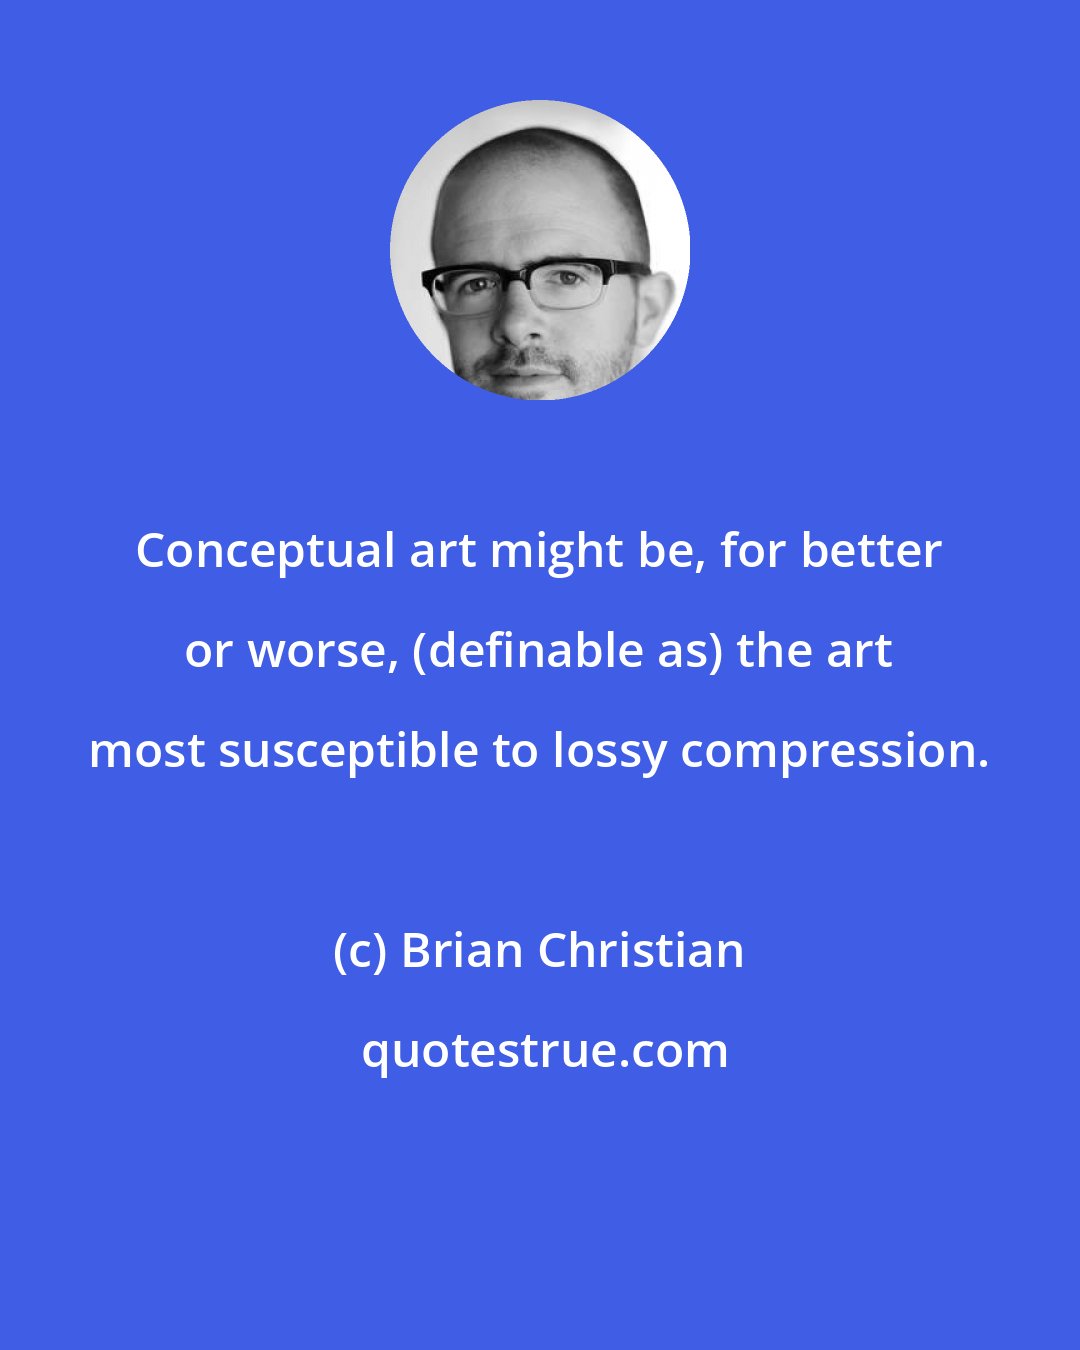 Brian Christian: Conceptual art might be, for better or worse, (definable as) the art most susceptible to lossy compression.